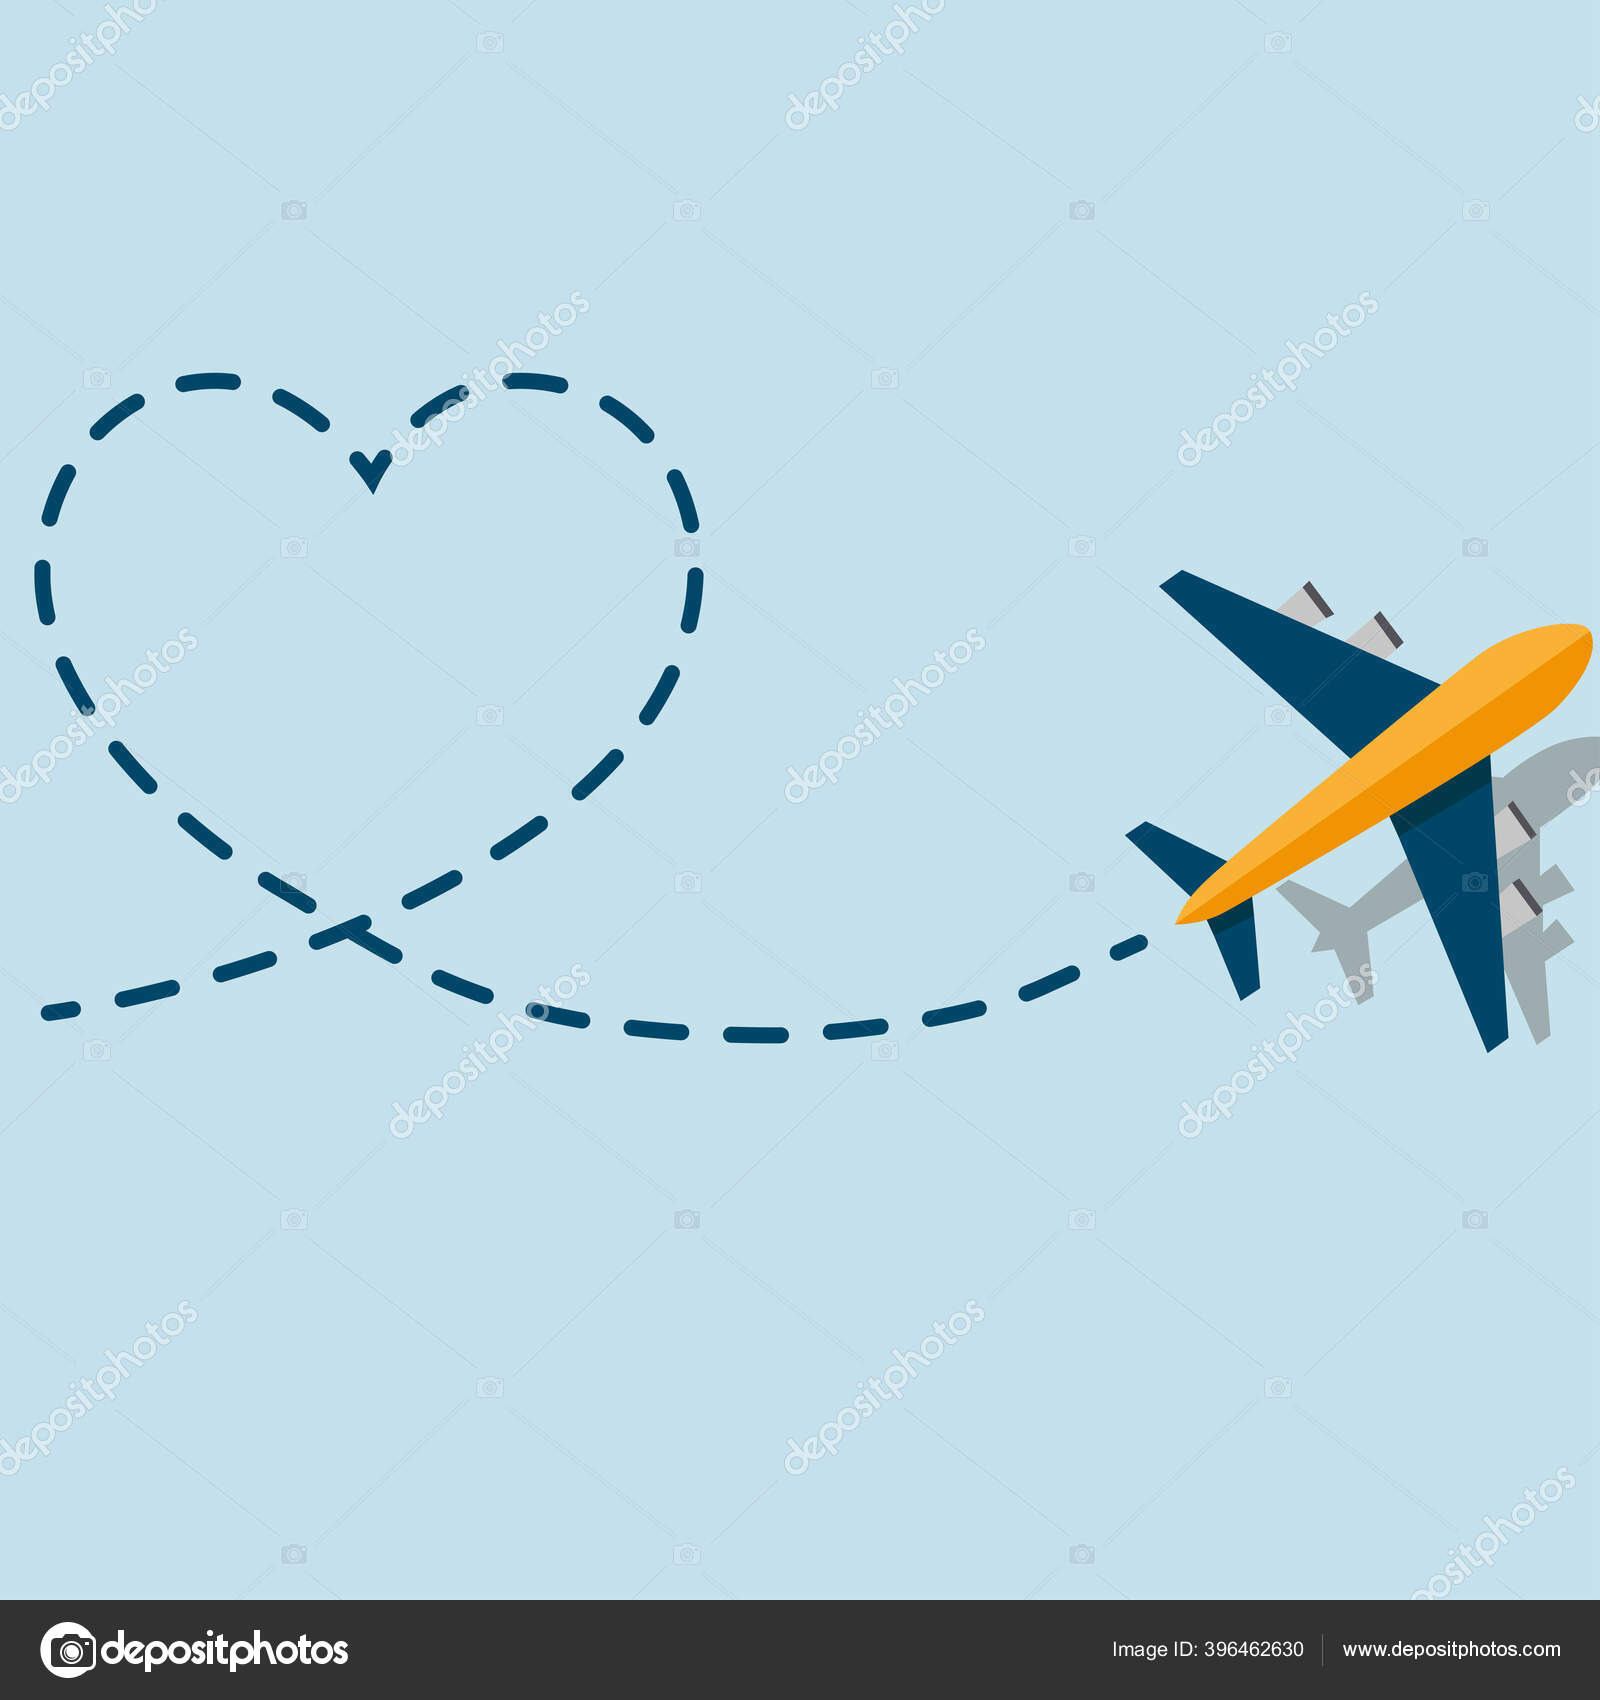 airport ticket counter clipart heart